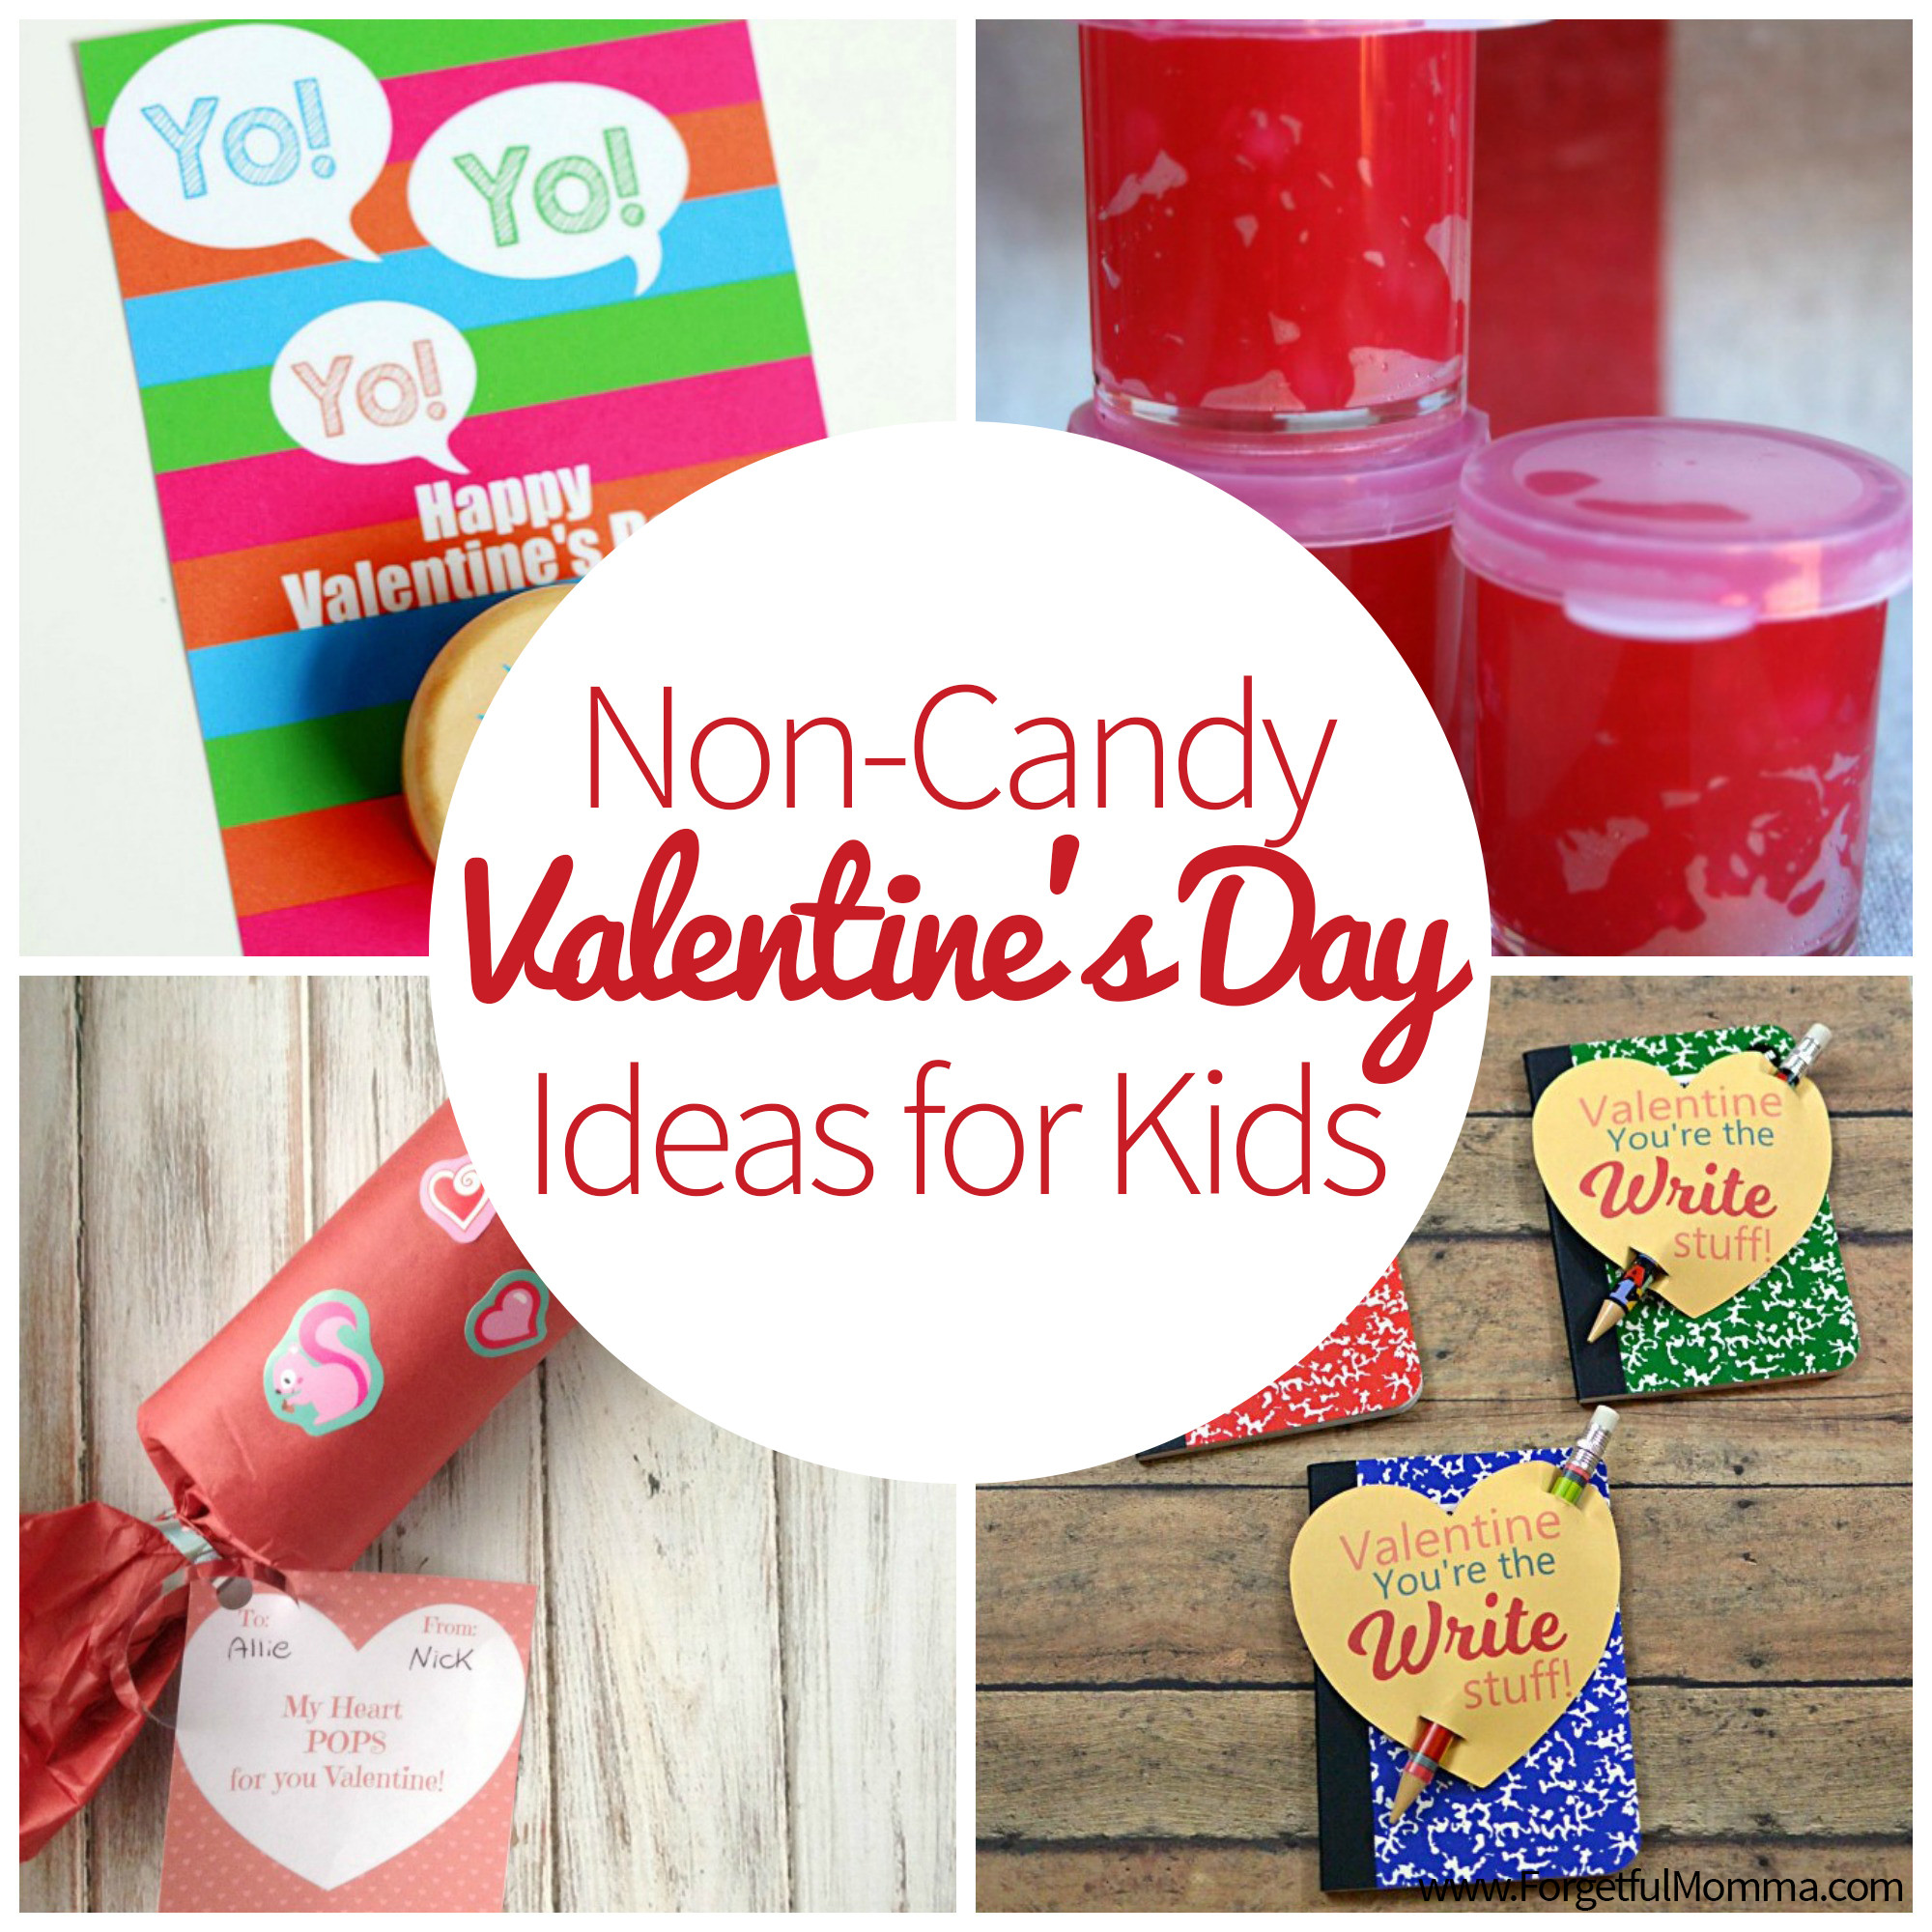 Valentine Gift Ideas For High School Girlfriend
 Non Candy Valentine s Ideas for Kids to Take to School